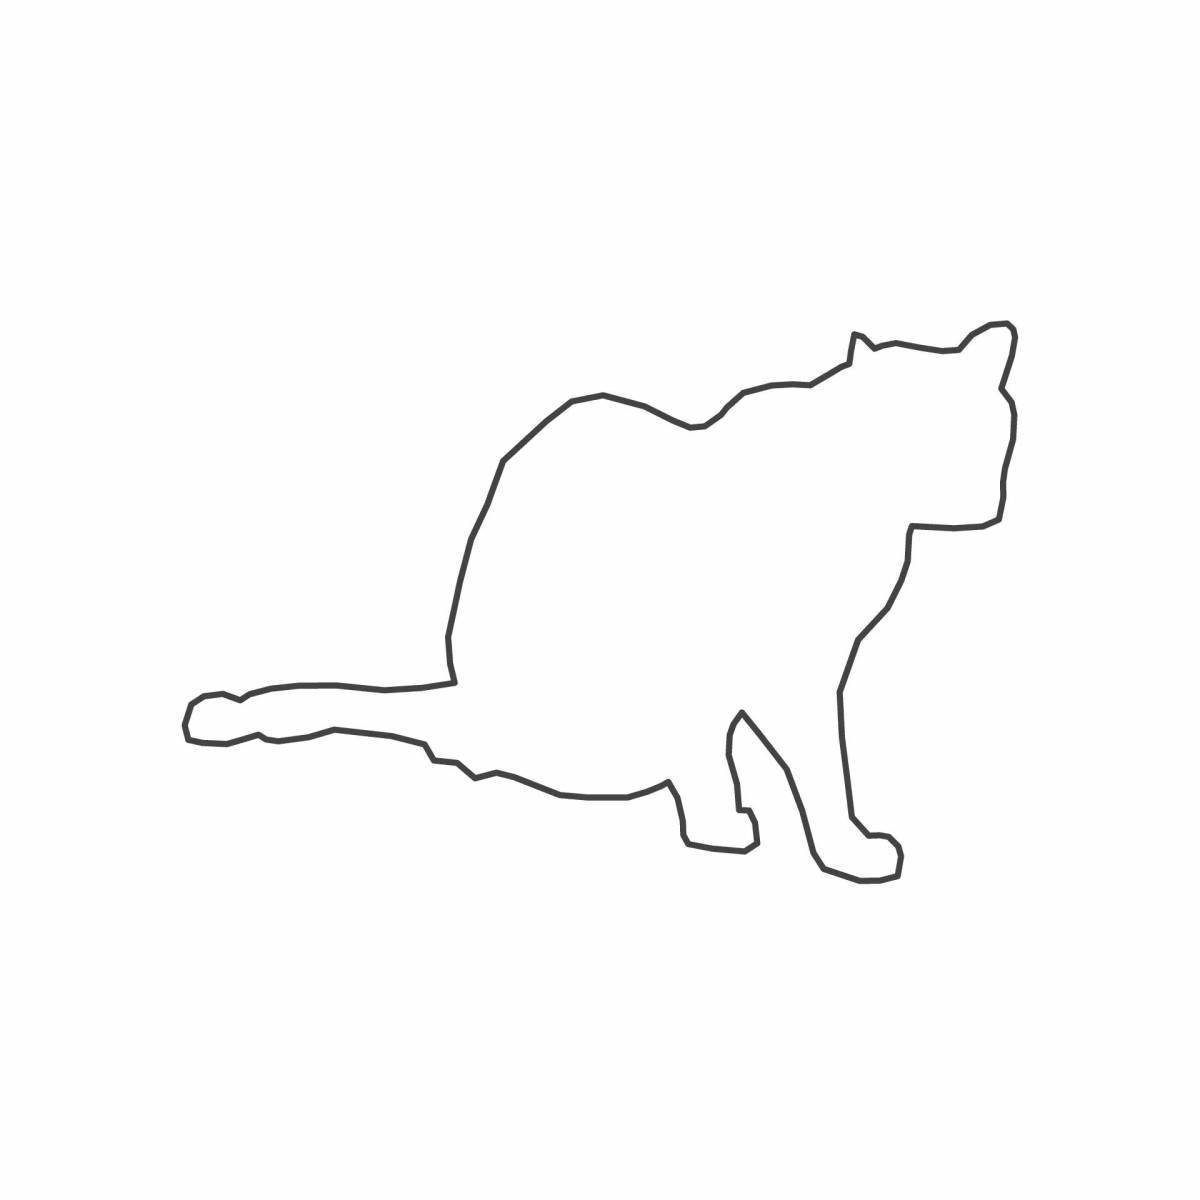 Coloring book silhouette of an adorable cat